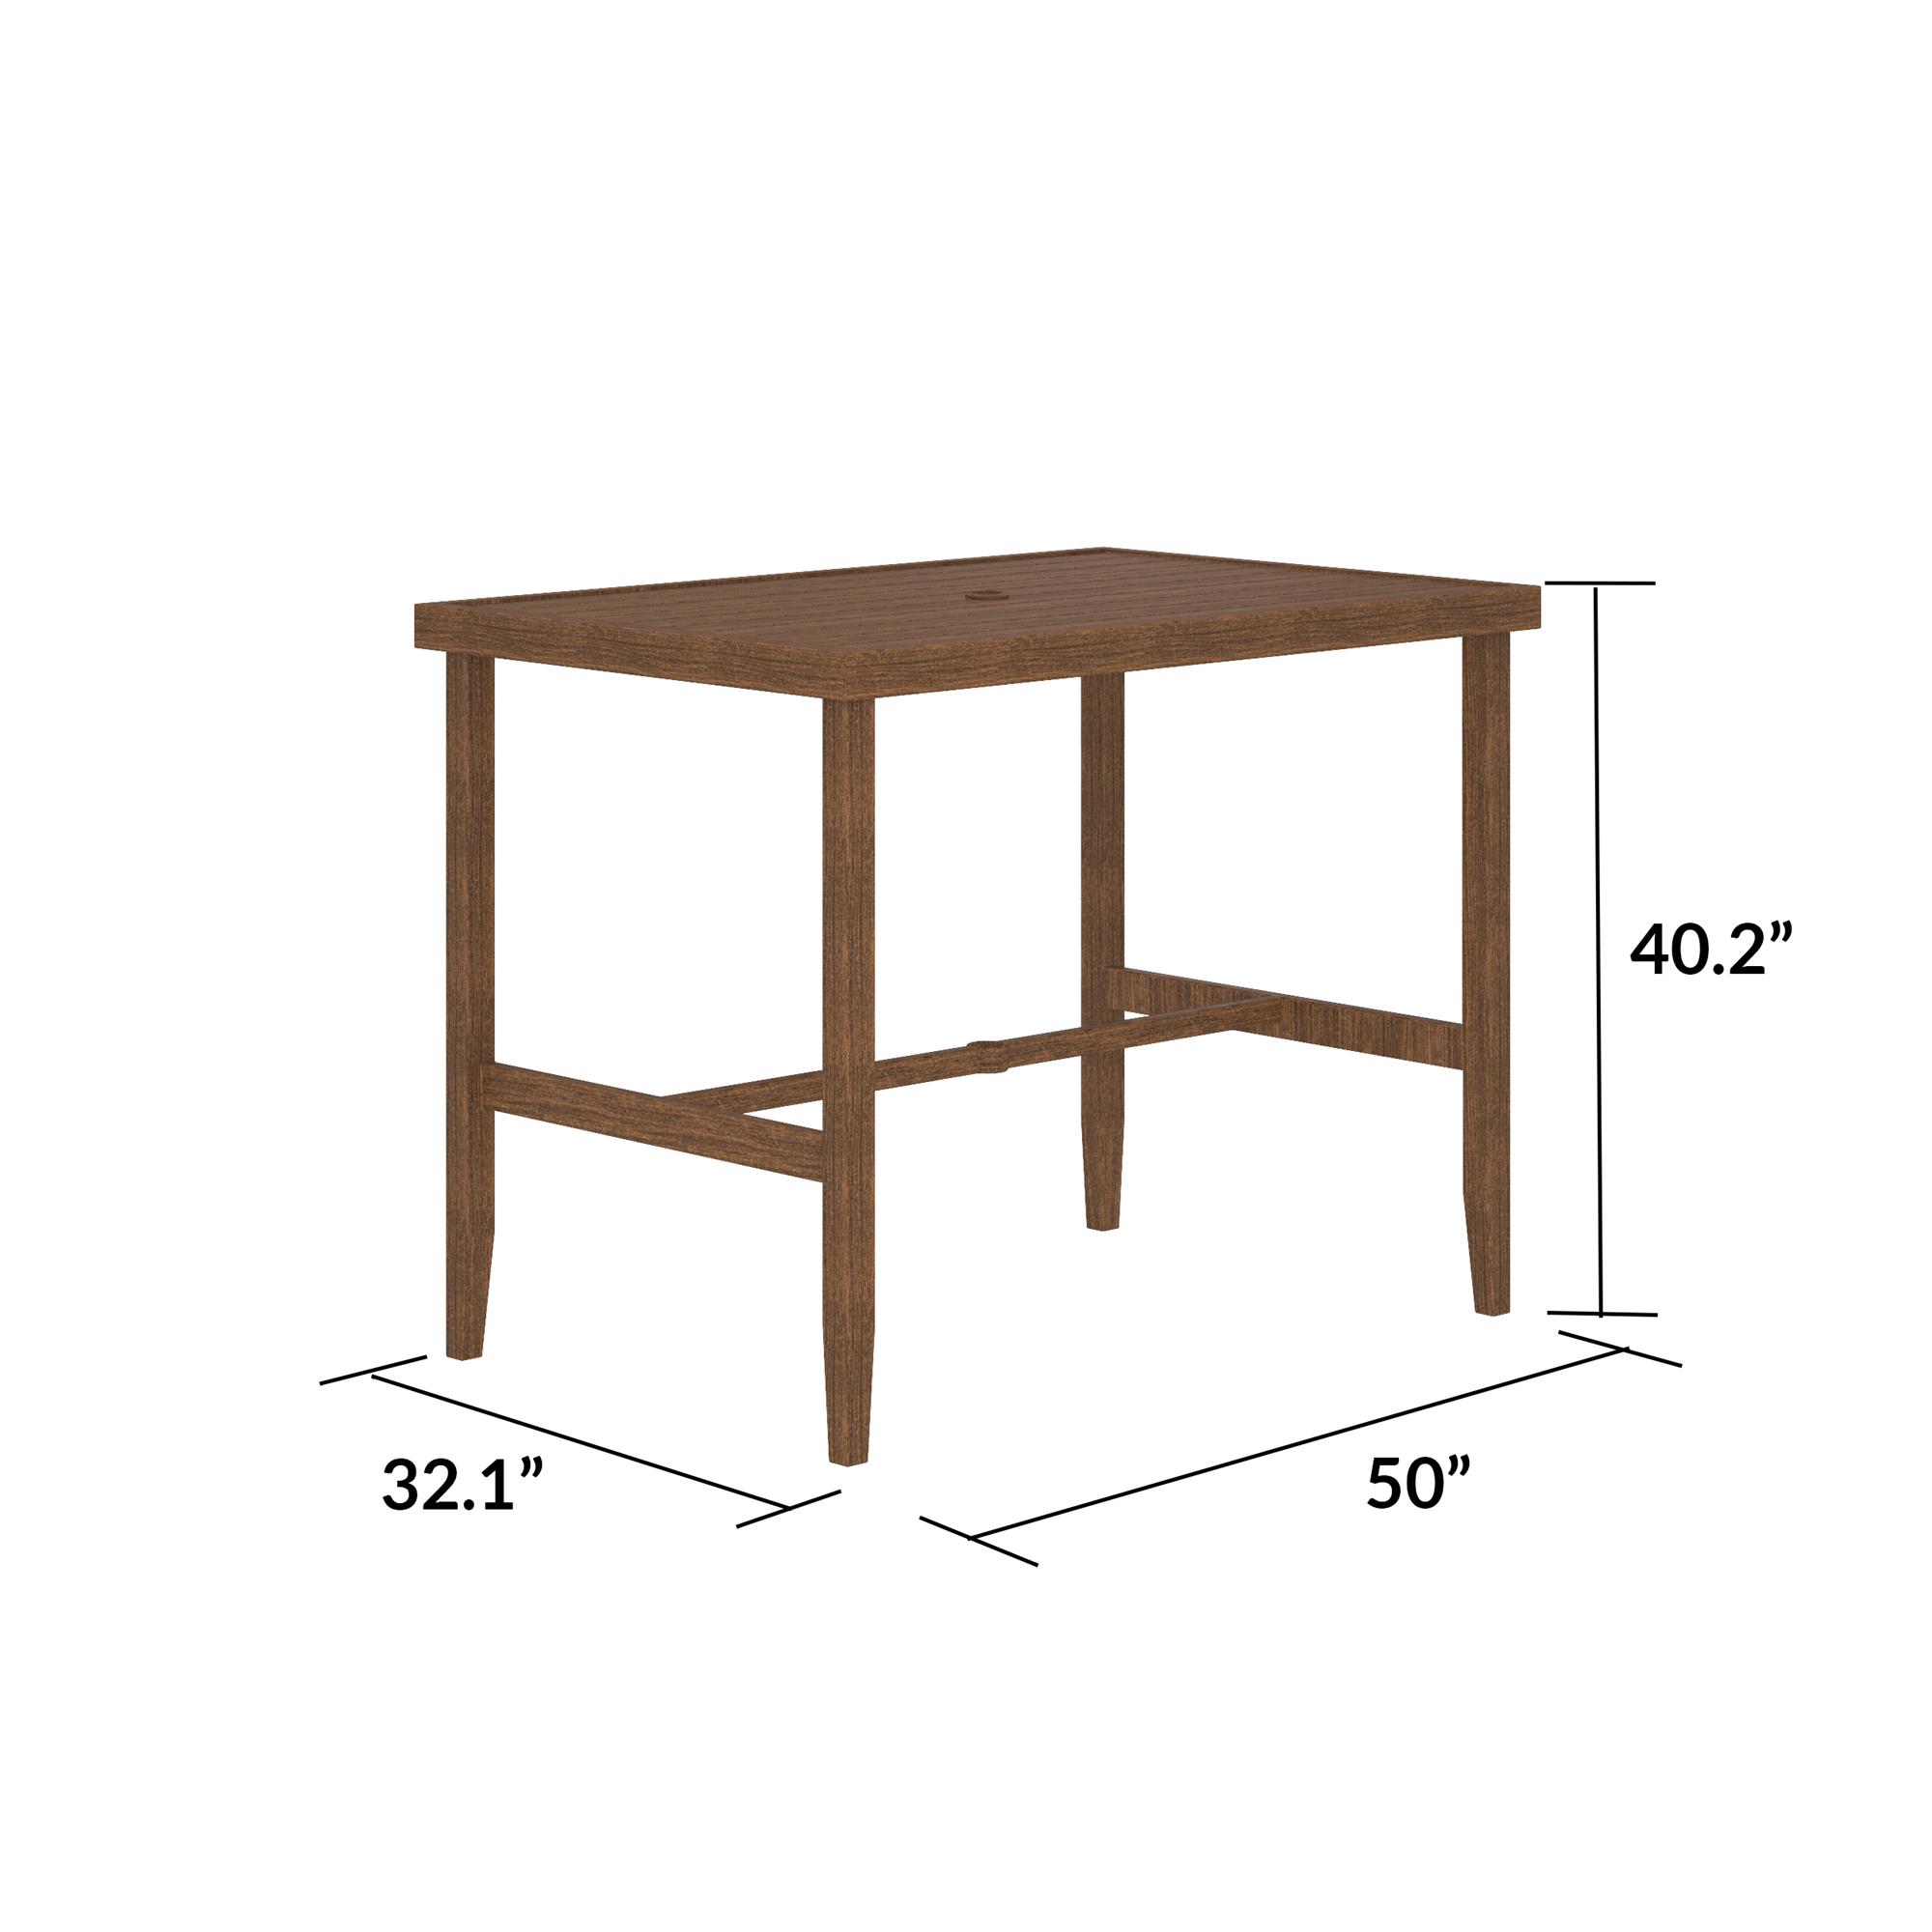 COSCO Outdoor Living, Patio Bar Table, Steel, Brown - image 5 of 8